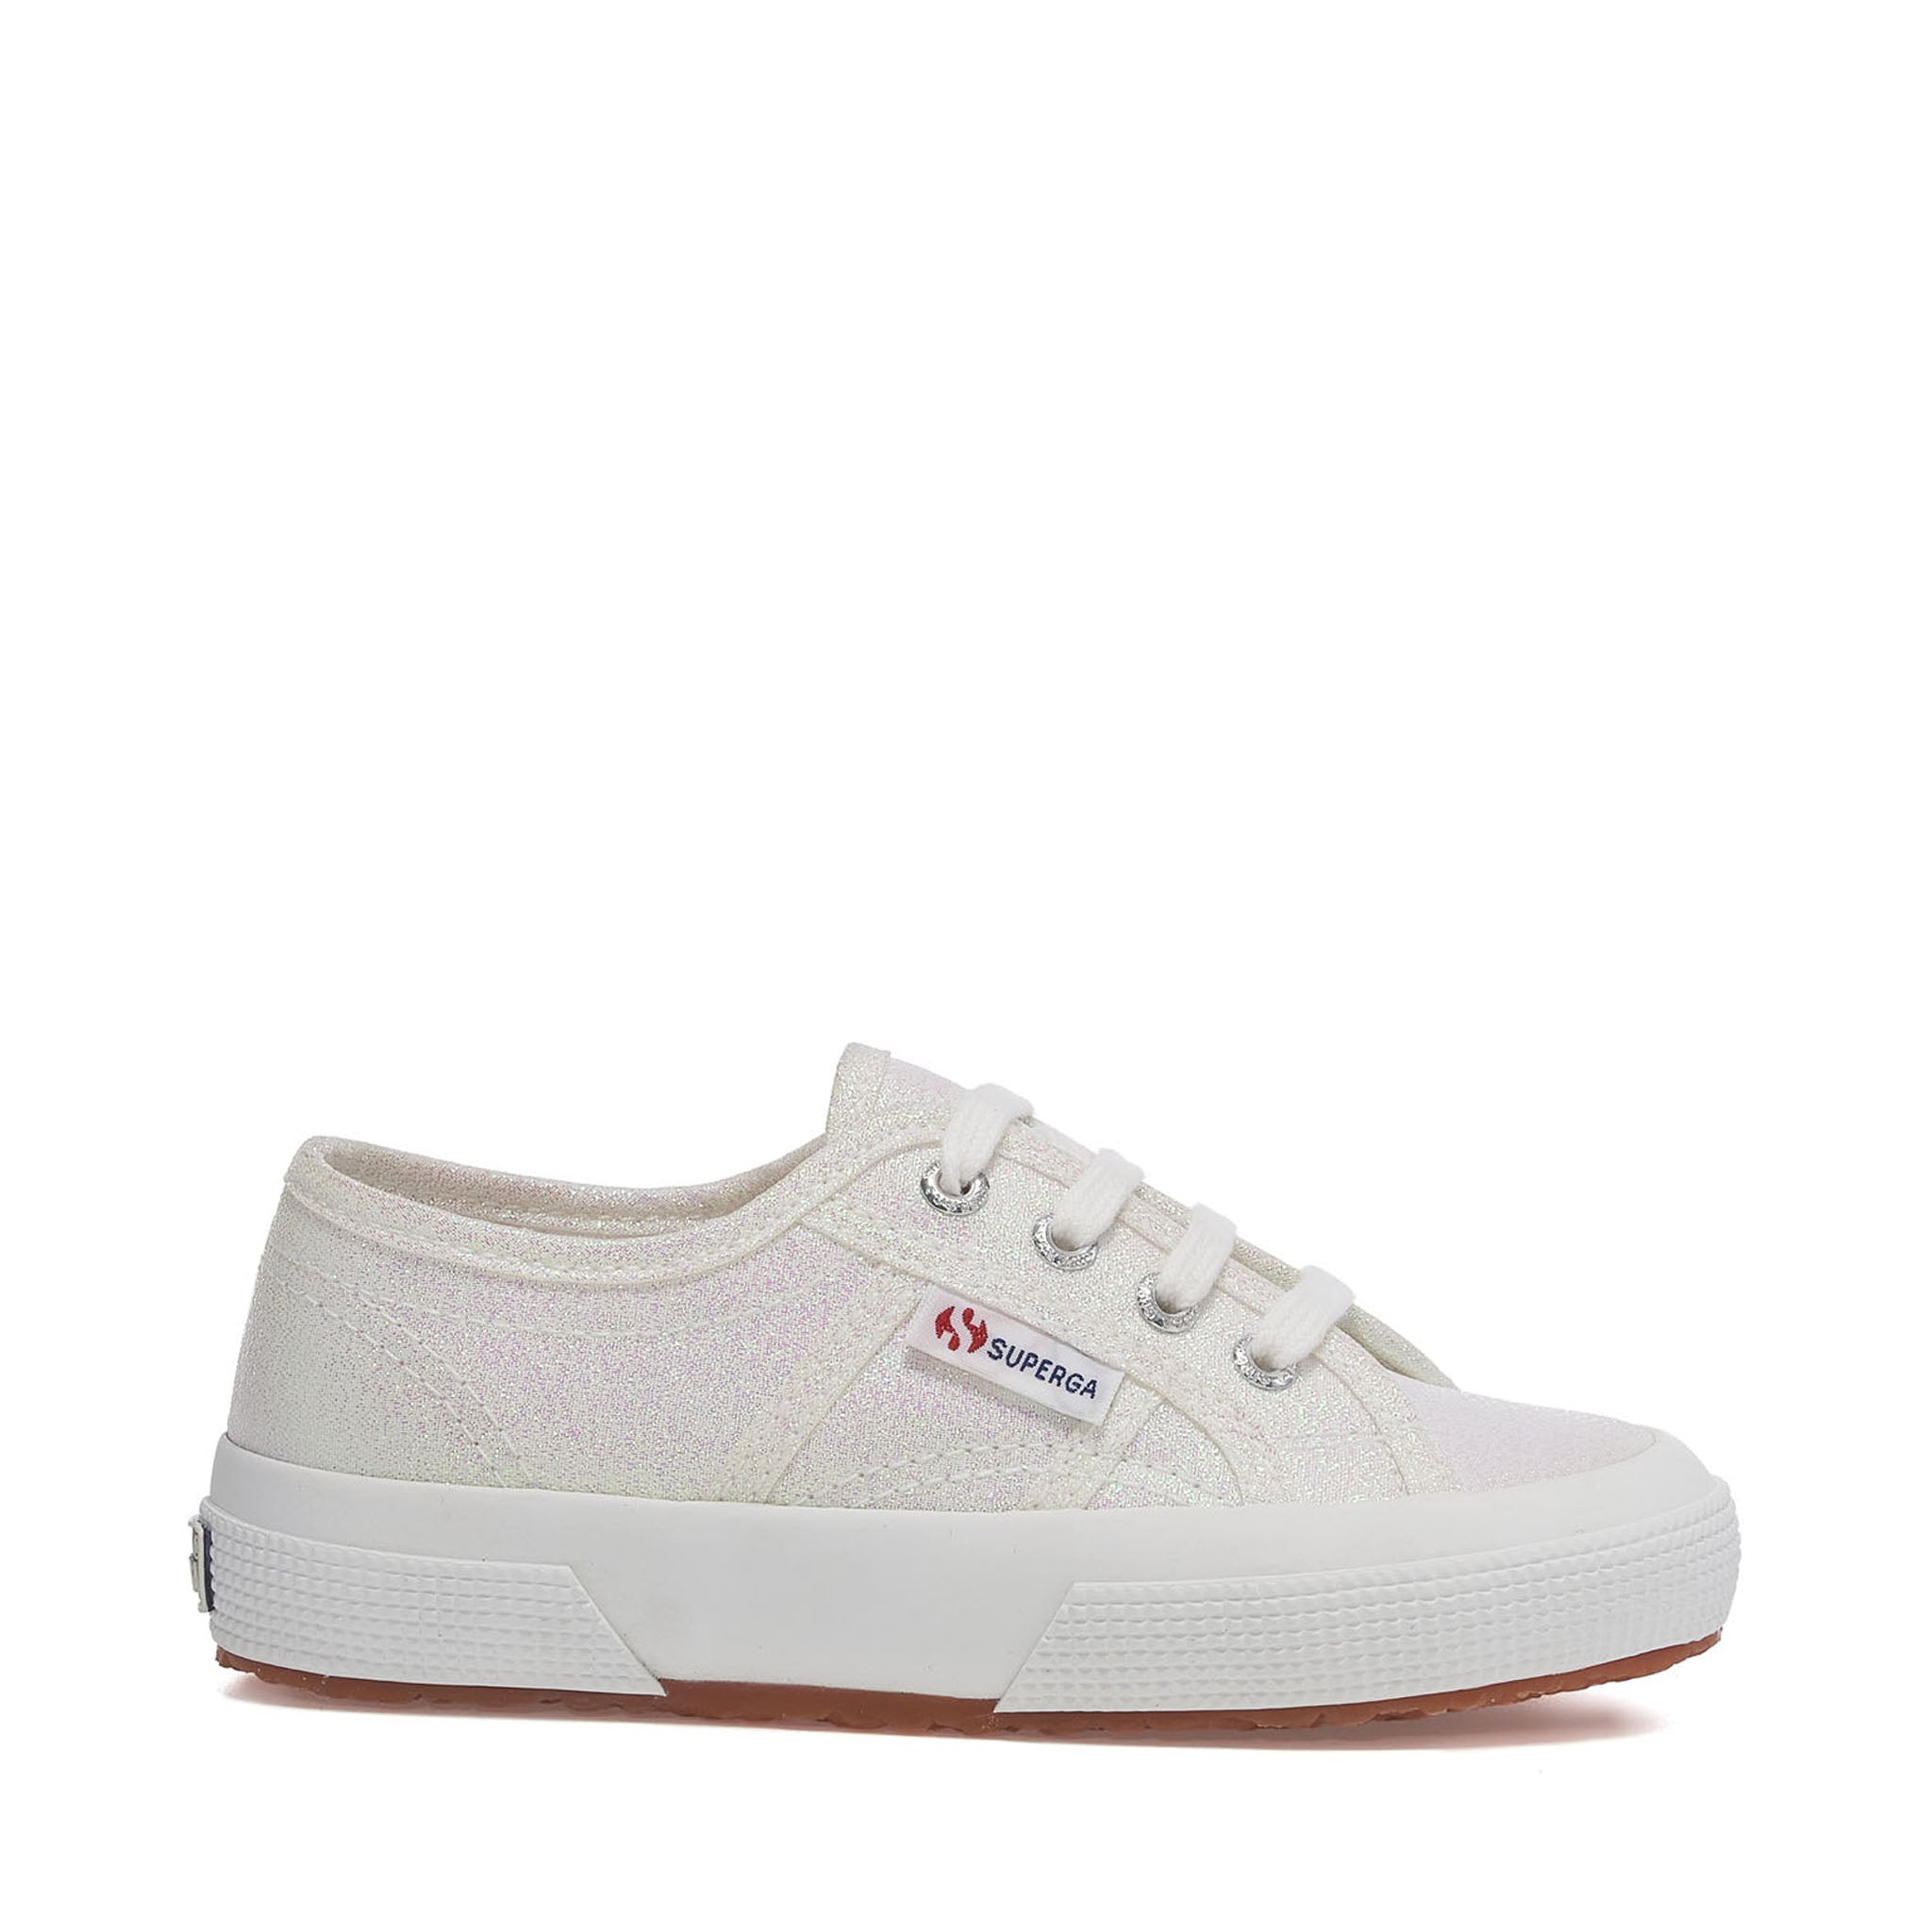 Superga 2750 Kids Lam√© Sneakers - Iridescent White. Side view.